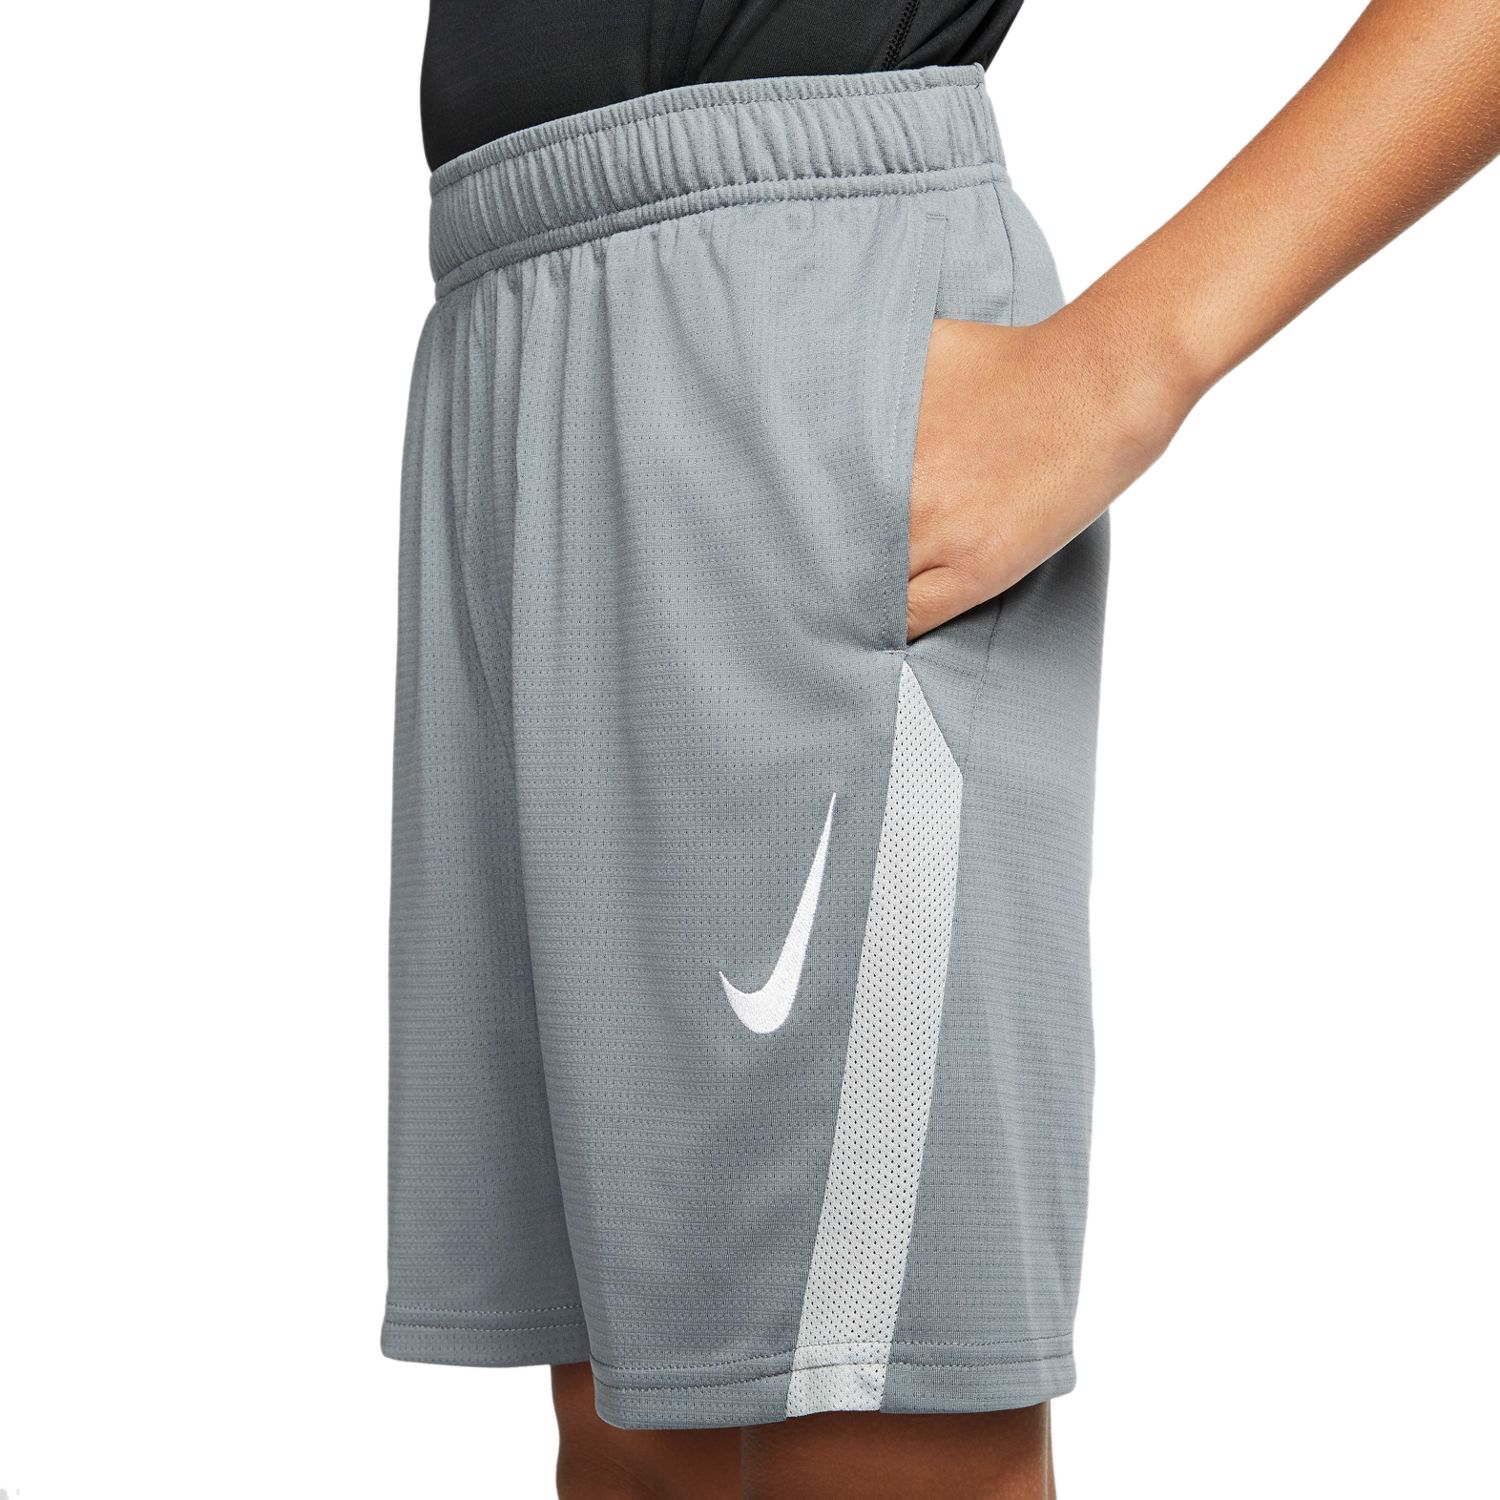 Boys Nike Shorts: Stay Active In Nike 